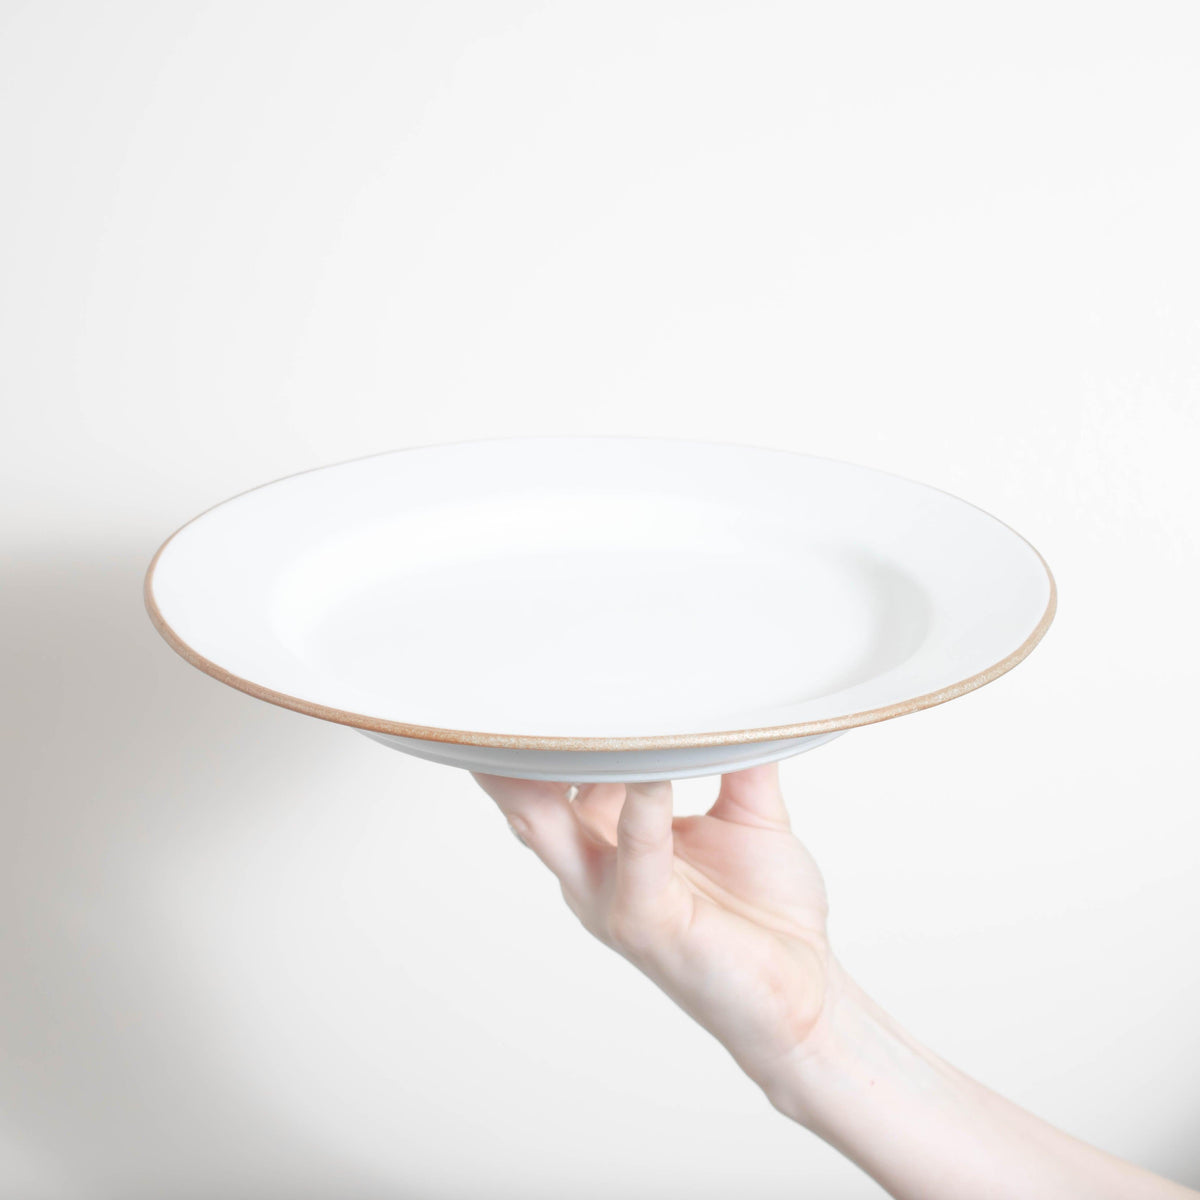 A person holding up a Matte White With Rye Edge 29cm Round Mains Plate by Bespoke 77, with a gold rim.